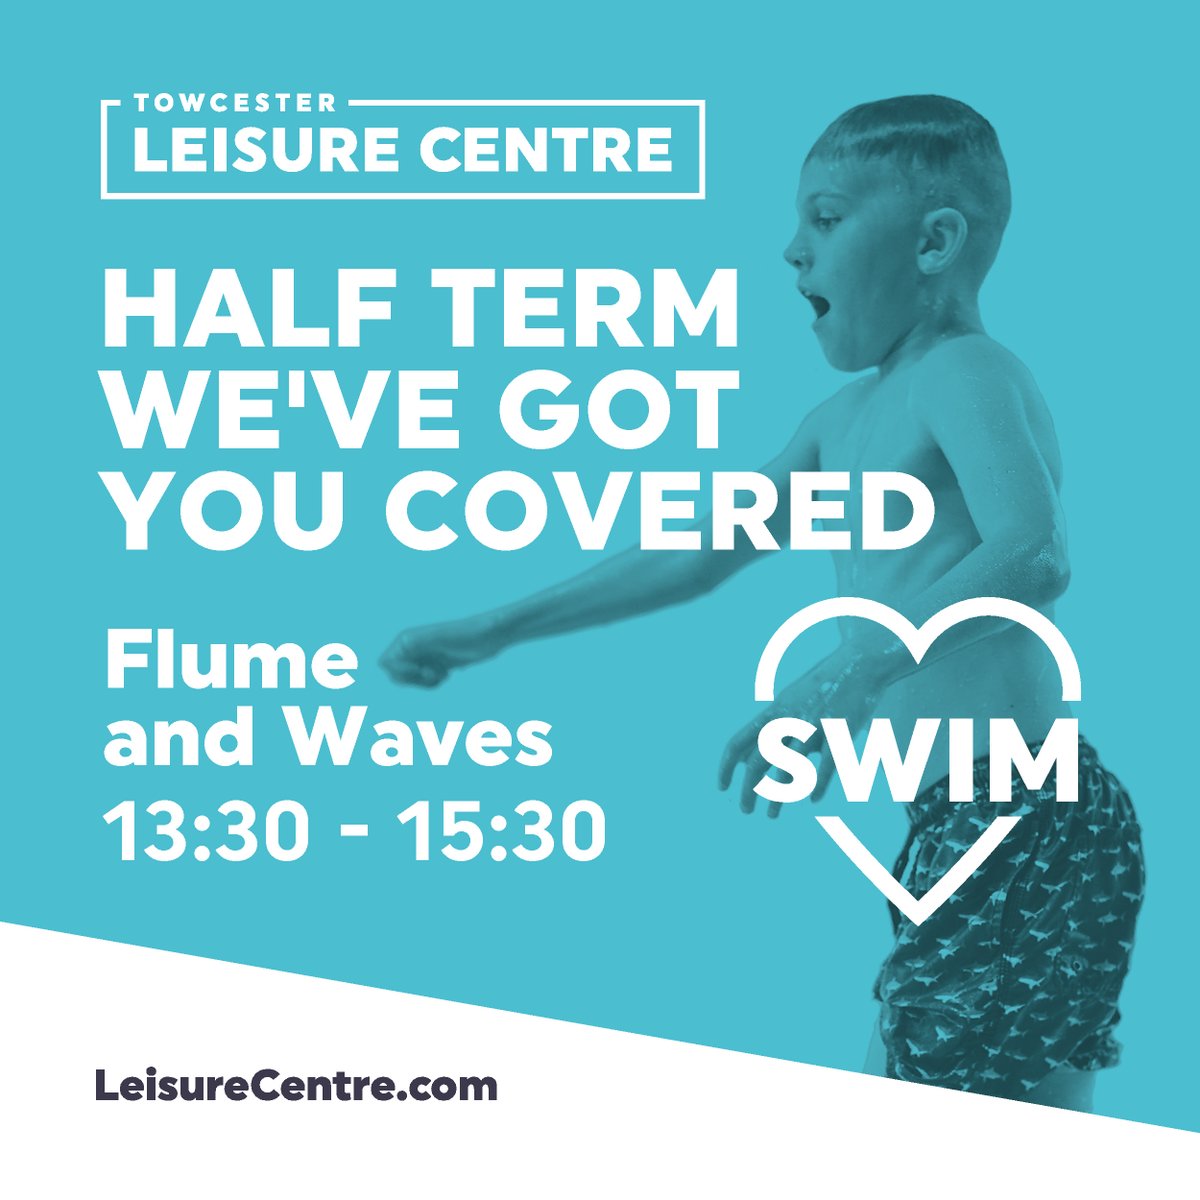 Flume & Waves session today (Monday 17th February) 13.30 - 15.30. #loveswimming #flumeandwaves #leisurecentre #mylocal